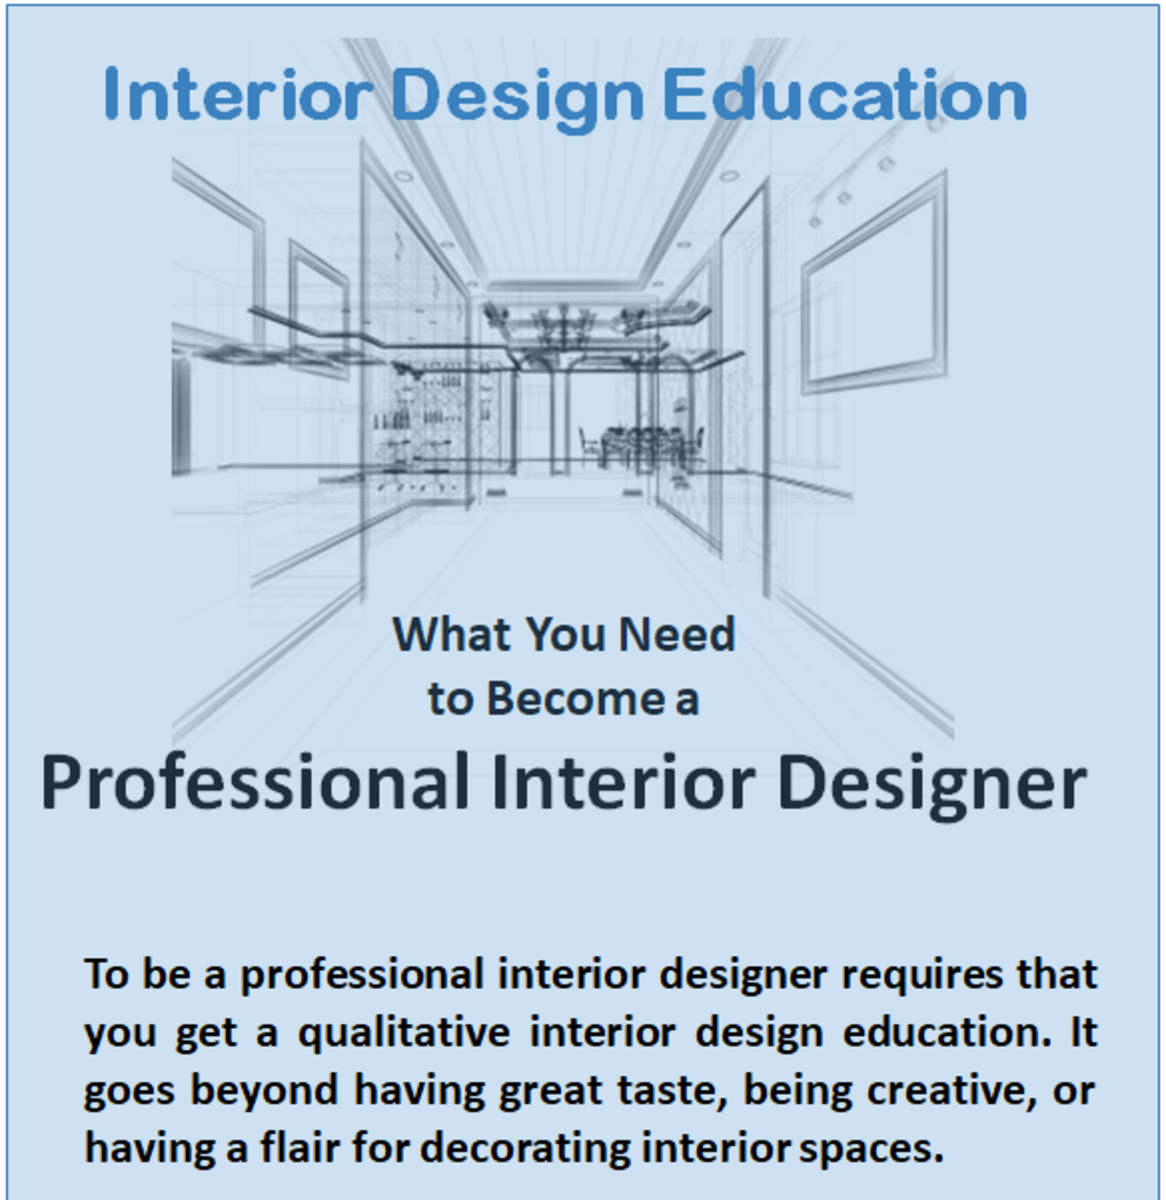 Need An Interior Design Education Attend Distant Learning Classes 